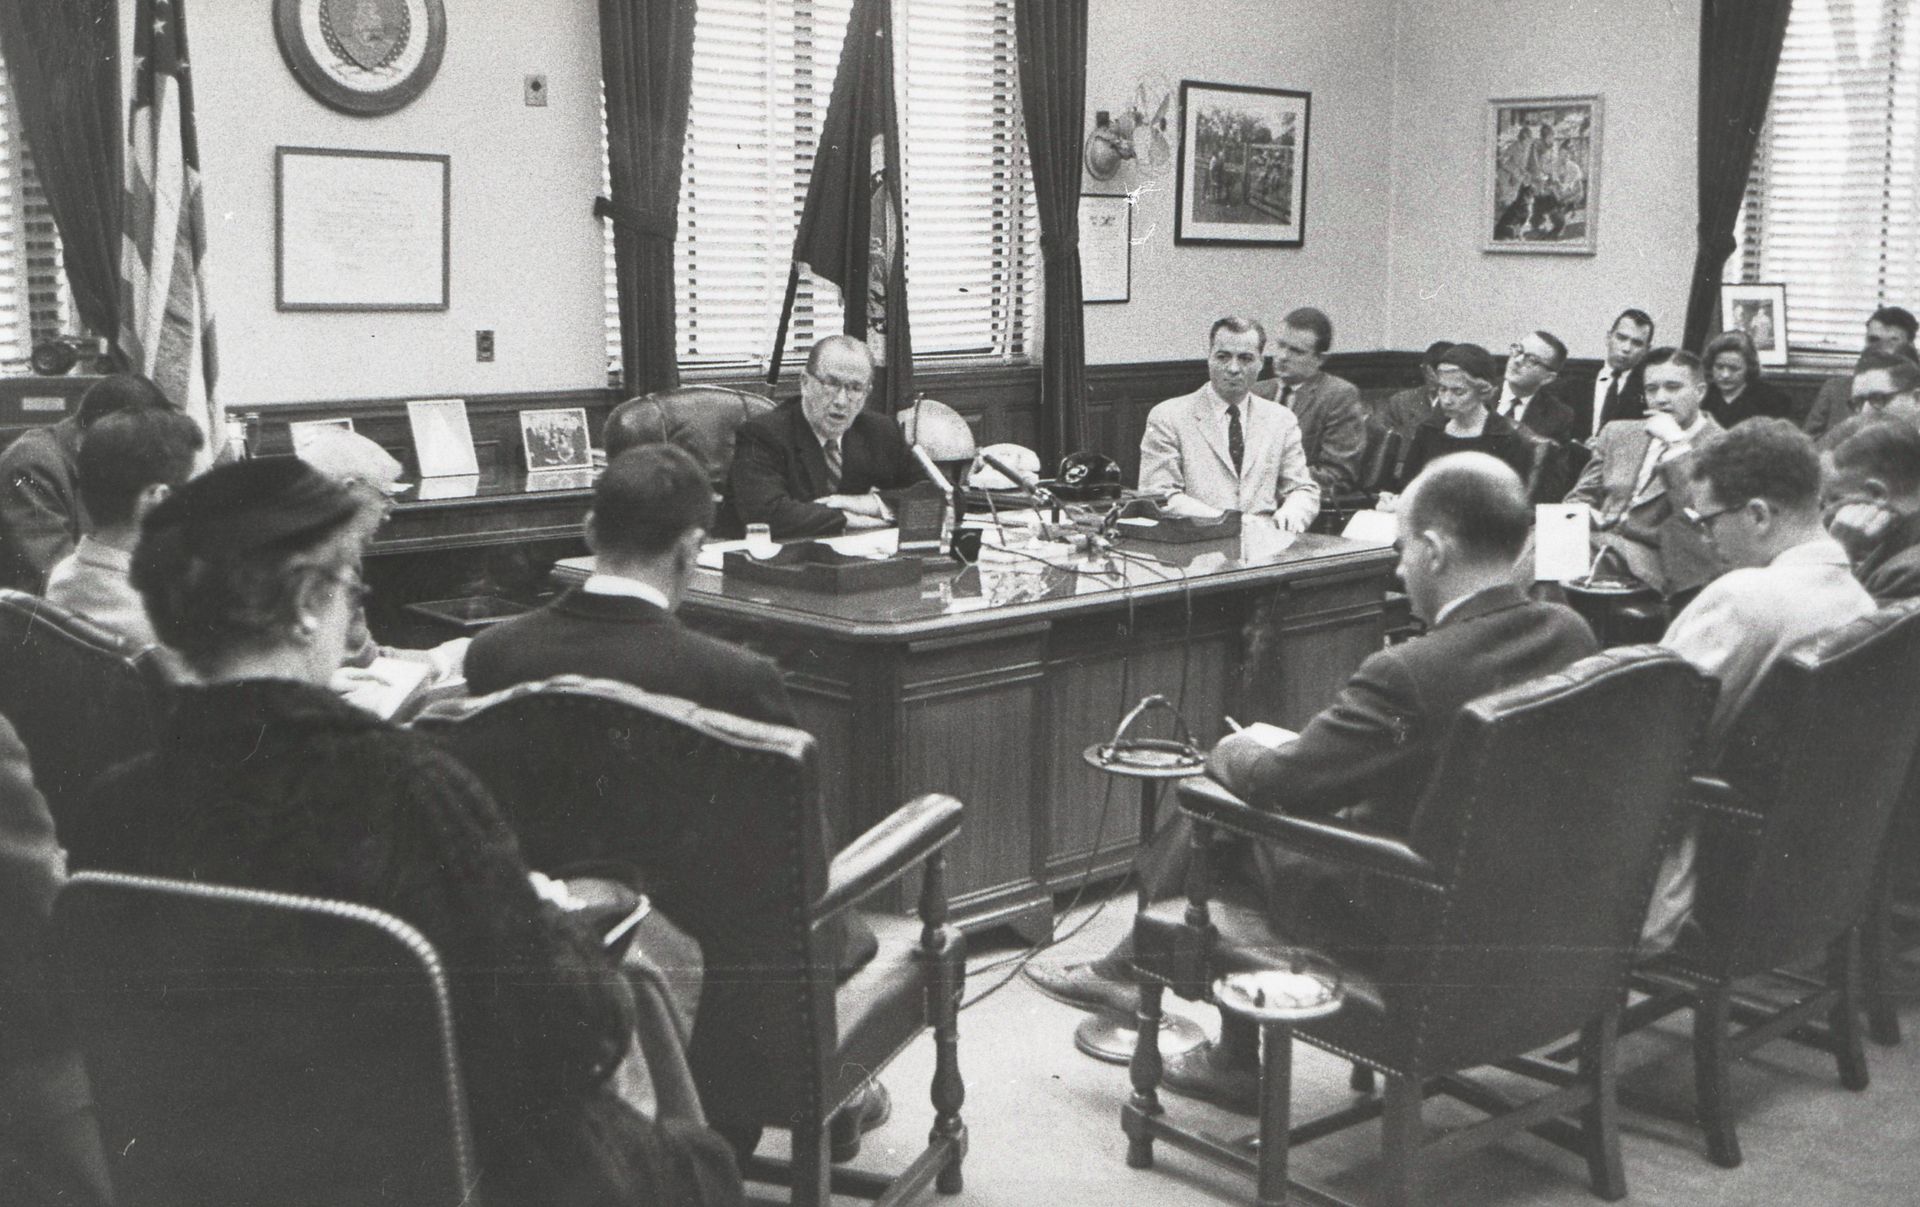 President Benson sitting behind a desk and speaking to a group of men and women.